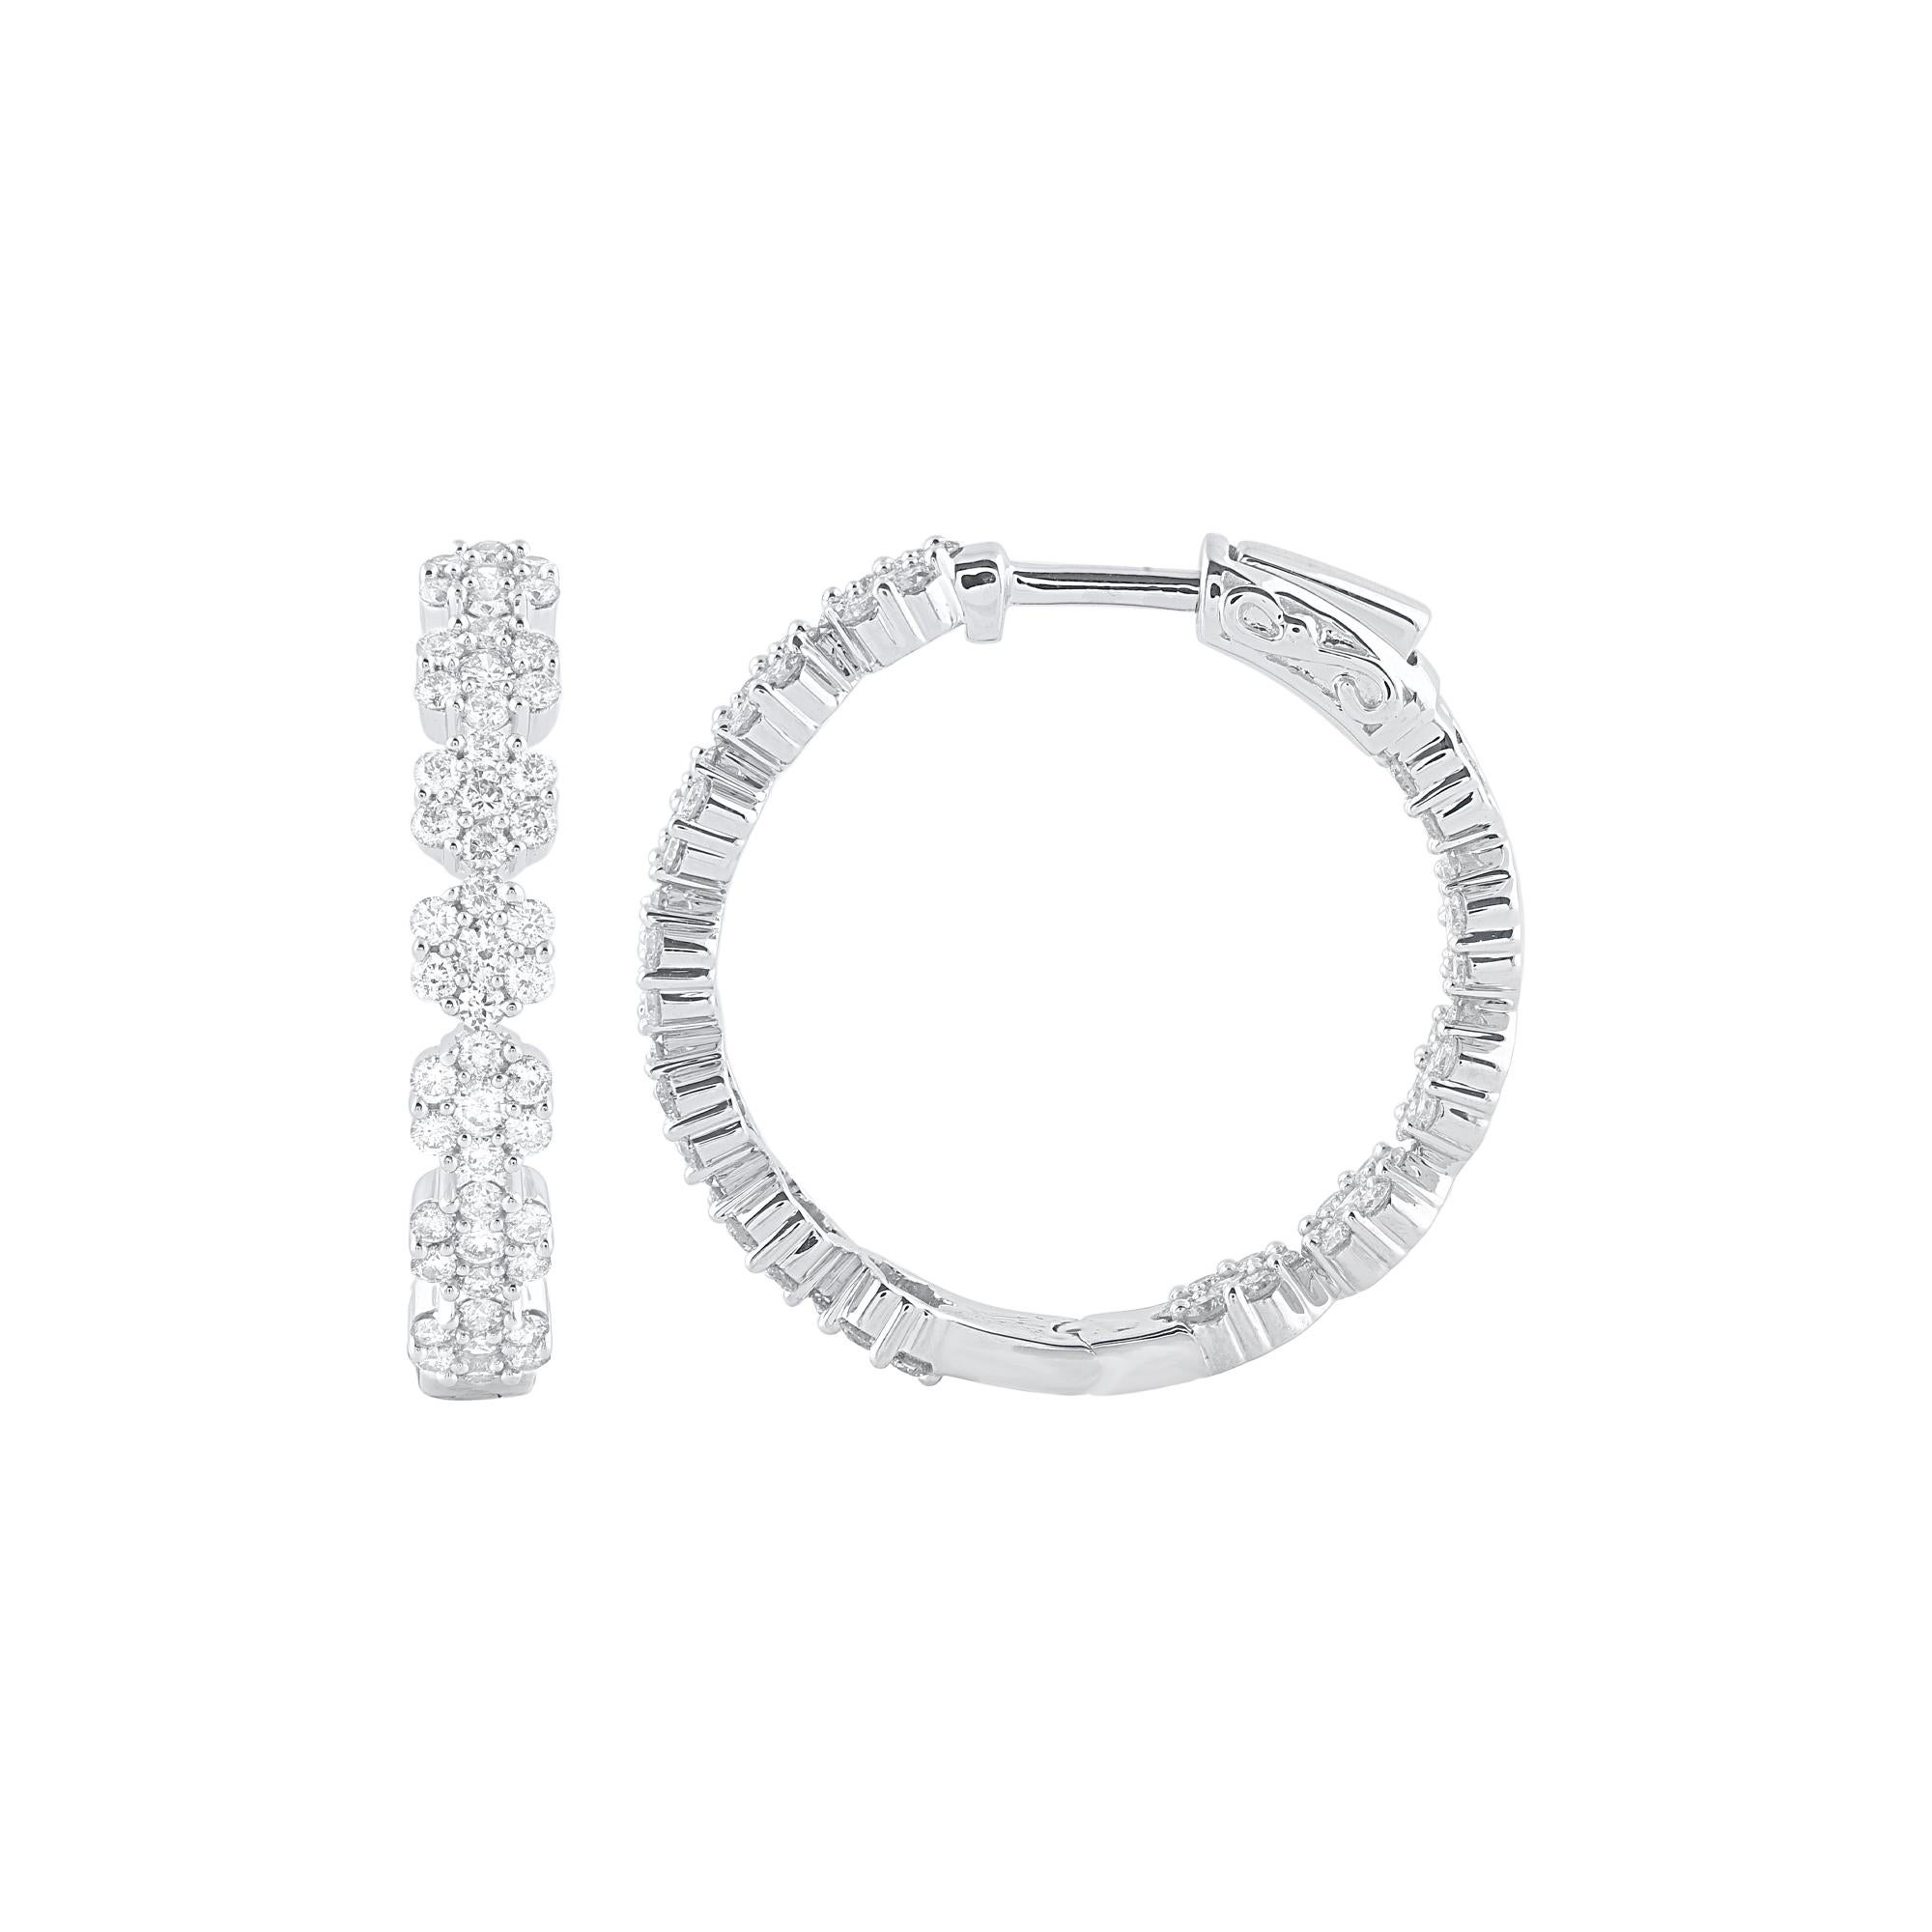 Brighten up your look and your day with these charming diamond hoop earrings. Crafted in 18 Karat white gold with 168 brilliant cut diamond in prong setting. Total diamond weight is 2.50 carat. These earrings secure with hinged back. The white